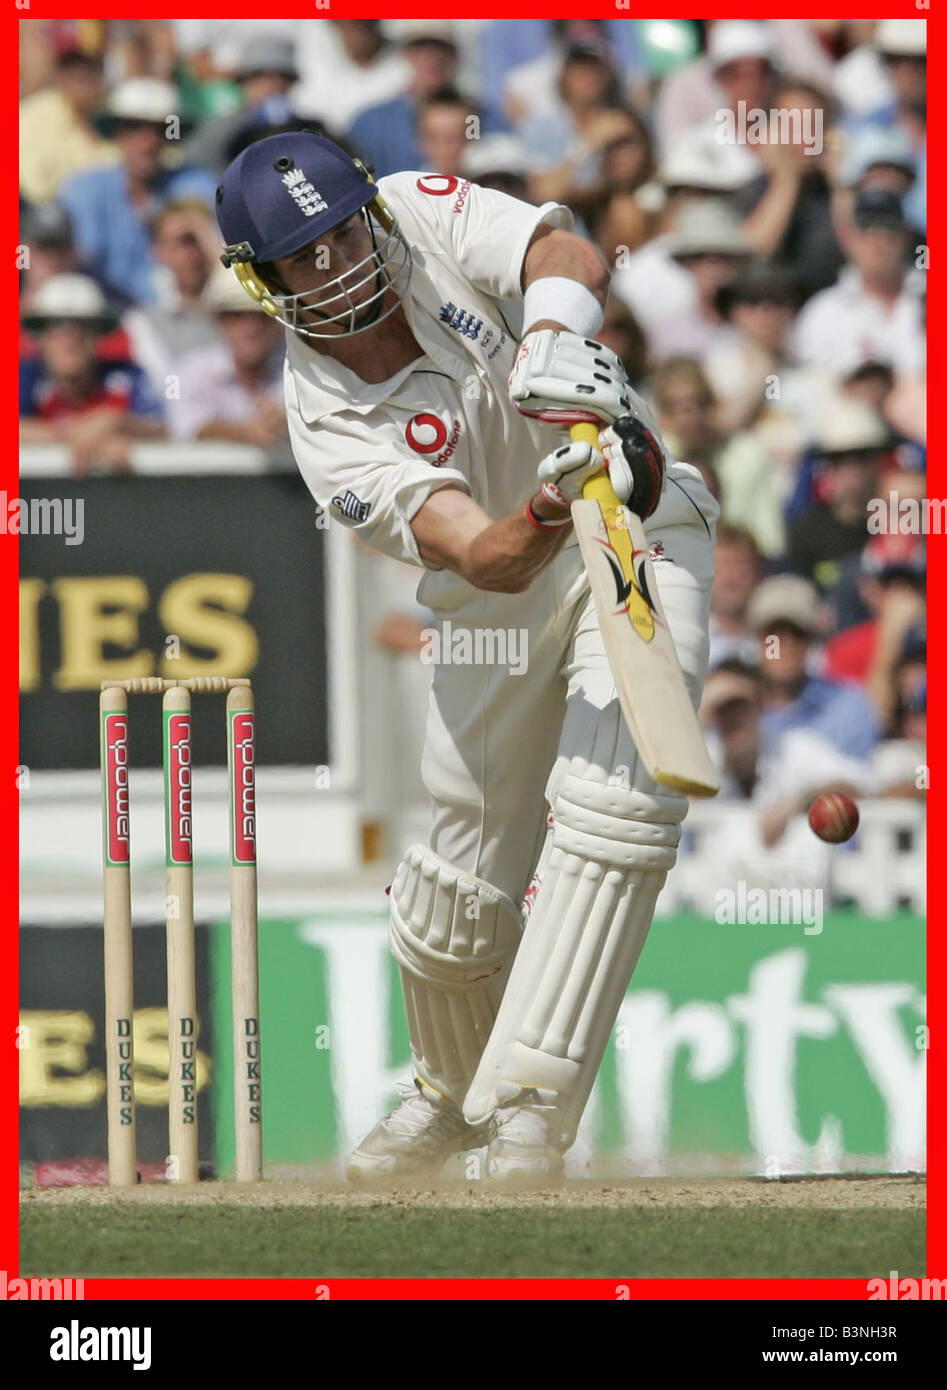 Kevin Pietersen six for England England V Australia 5th Ashes Test The Oval September 2005 England won the Ashes for the first time in 18 years making cricket history after securing a draw in the fifth test to win at the Oval Stock Photo